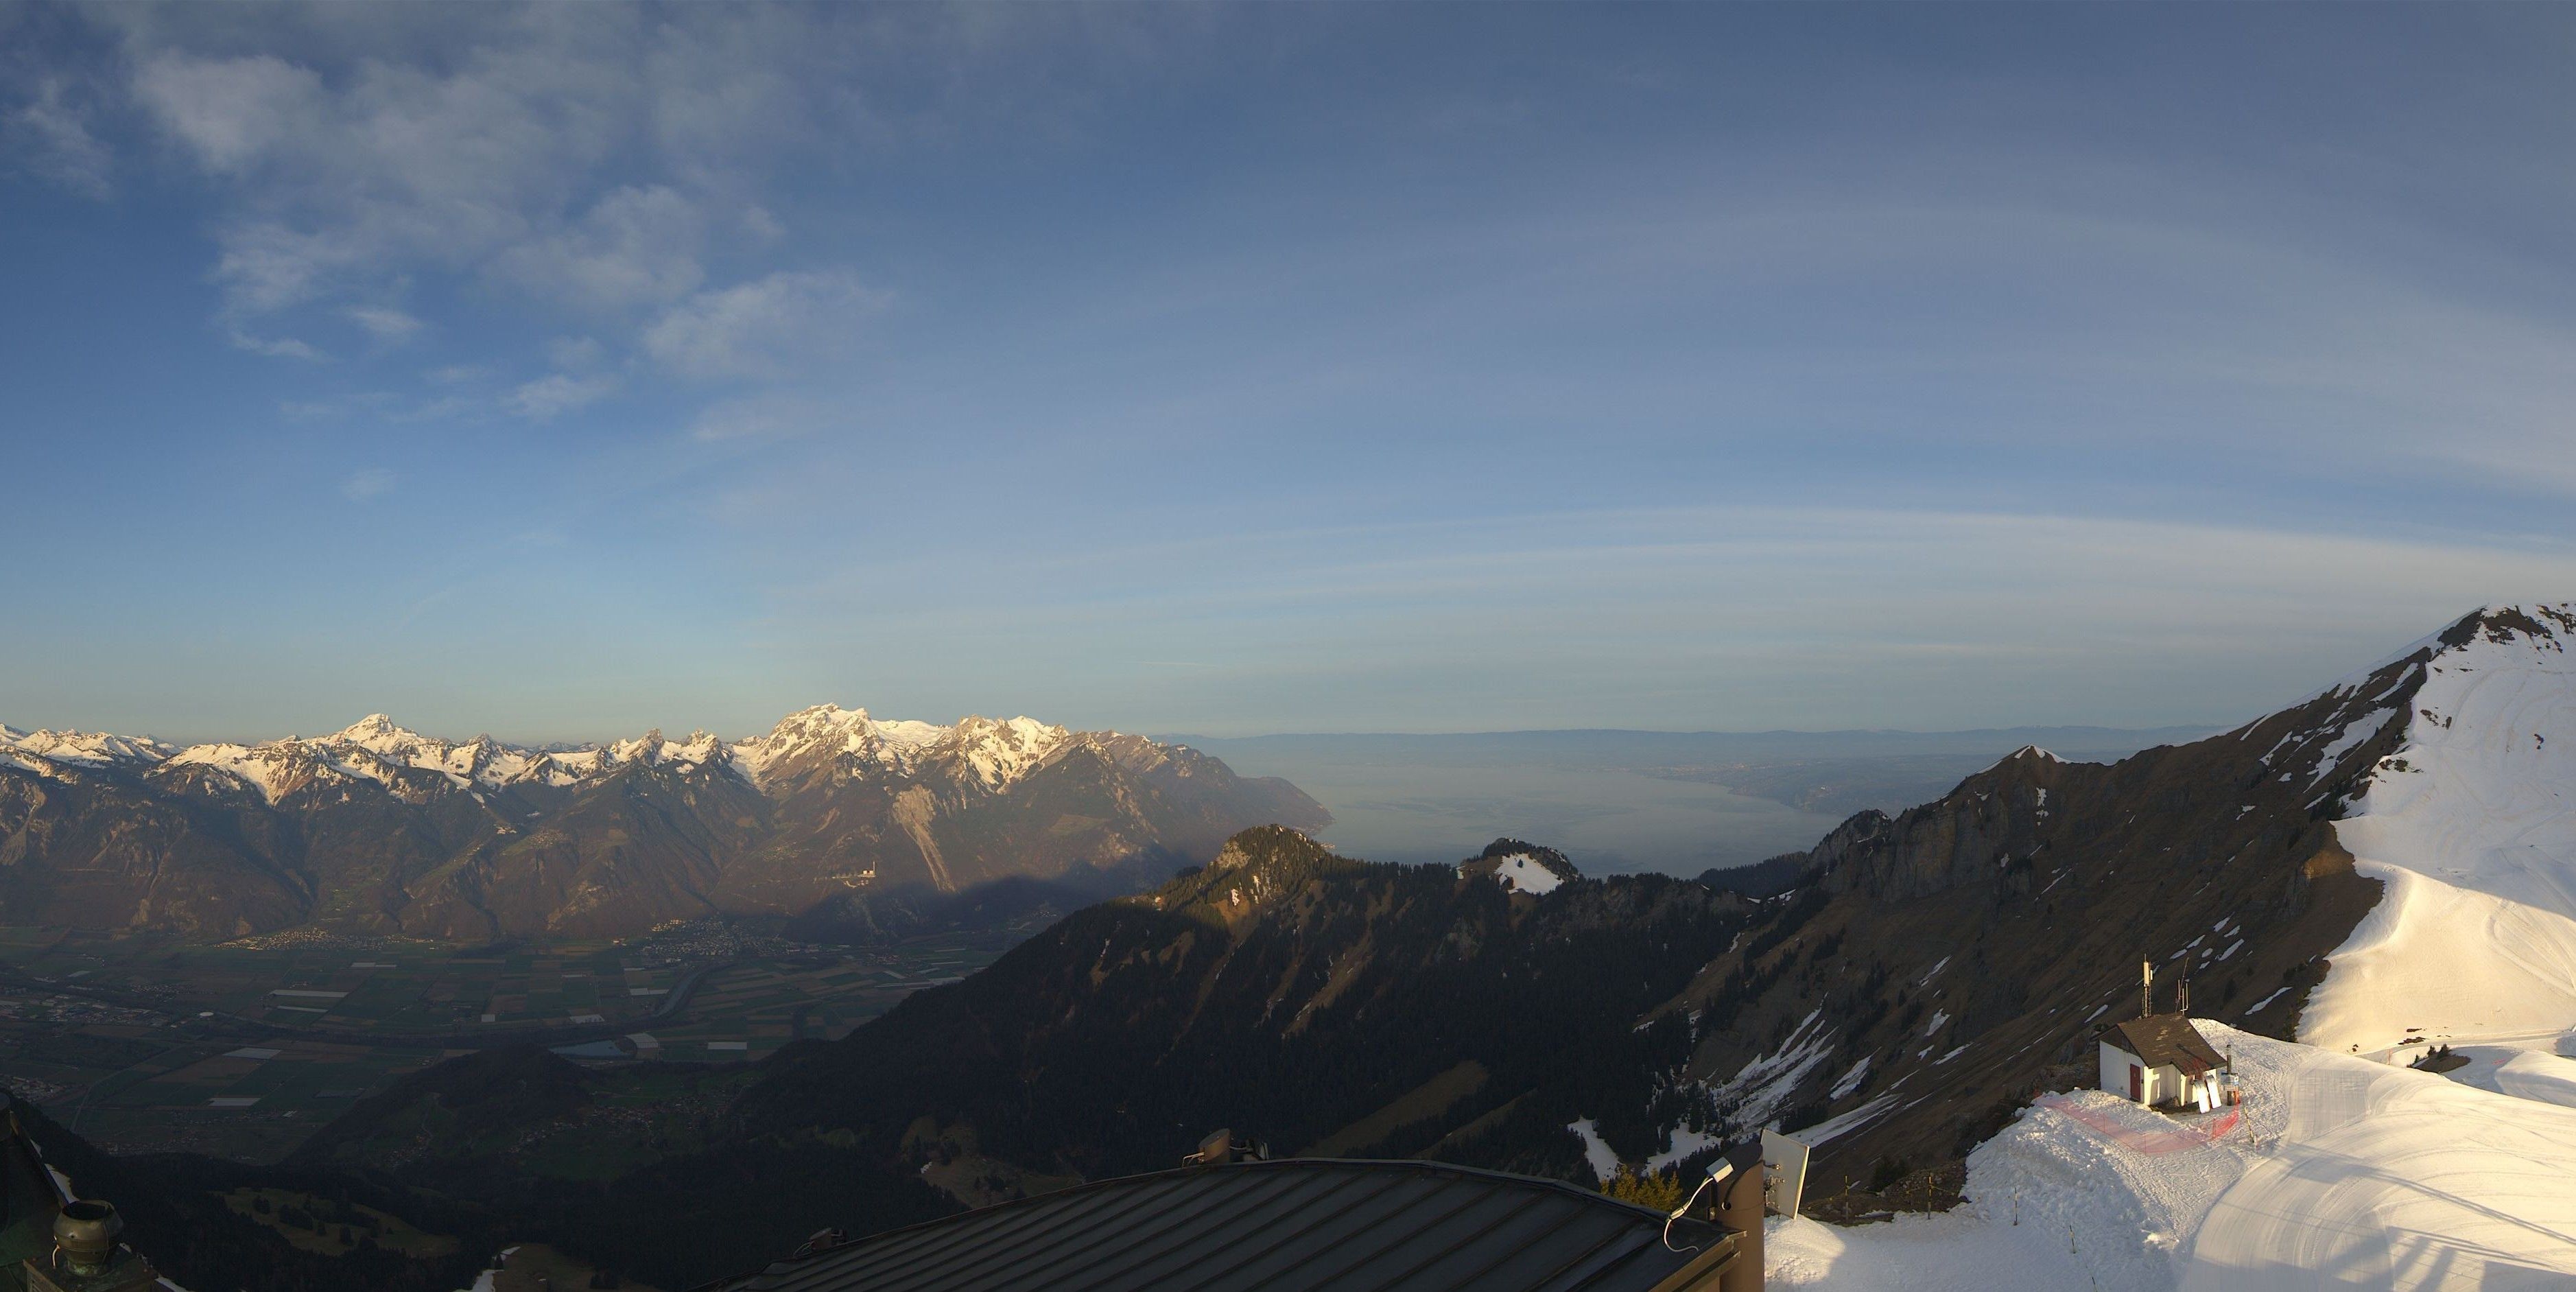 The day also starts sunny in Leysin, Switzerland, but some clouds are already approaching in the distance (roundshot.com)